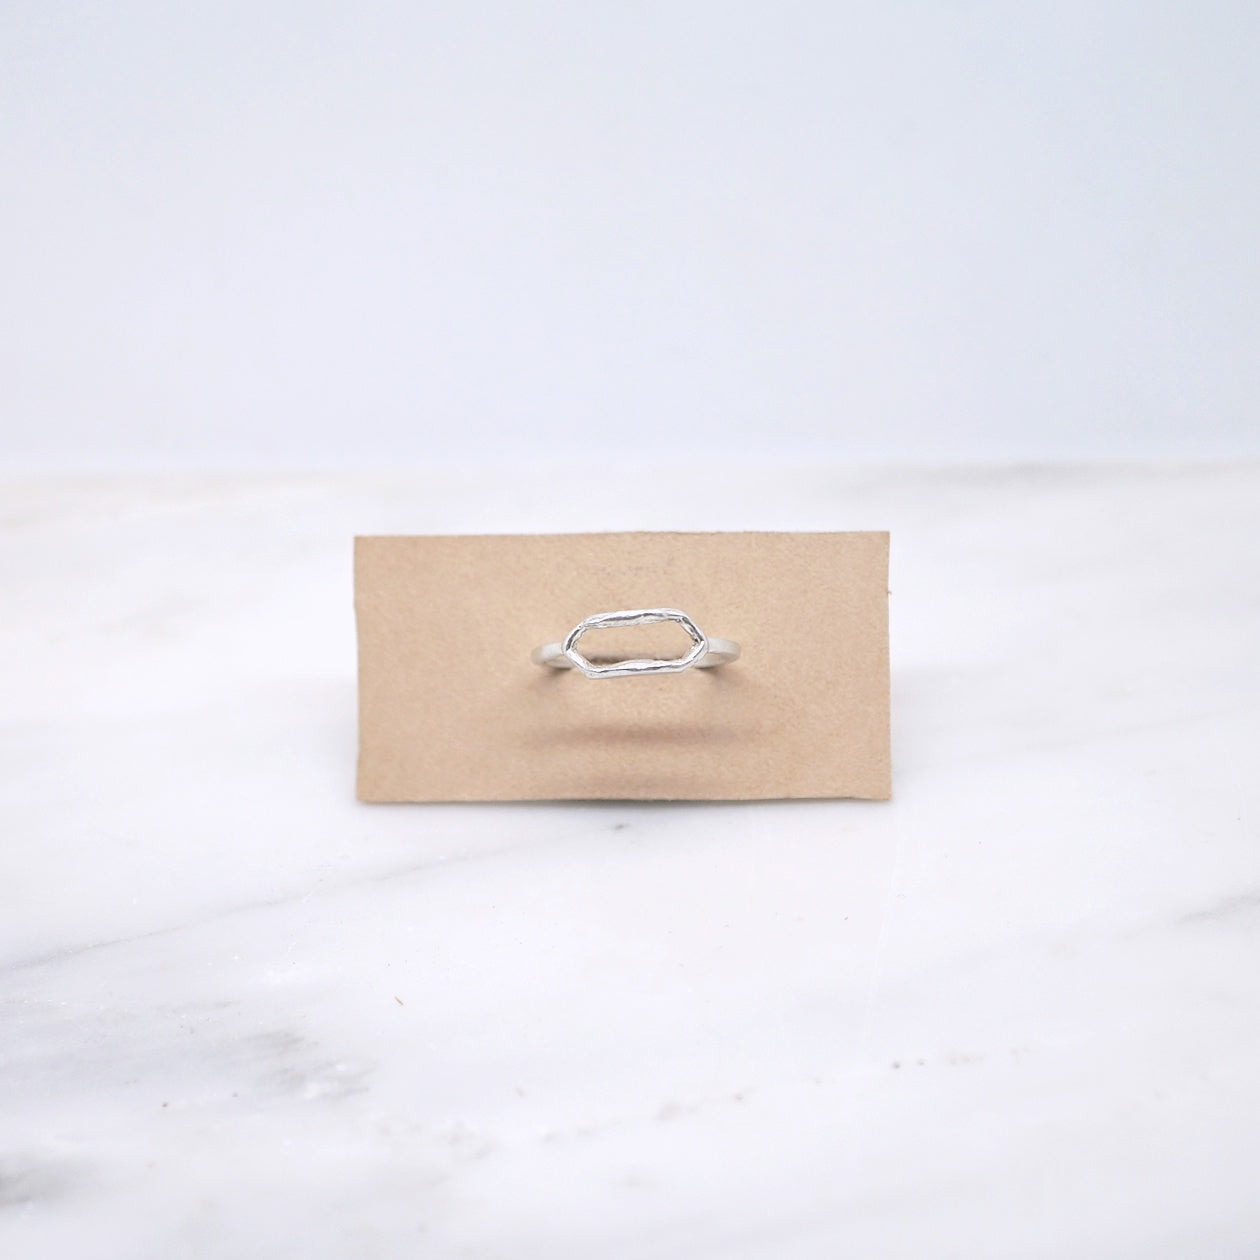 Open signet ring in sterling silver